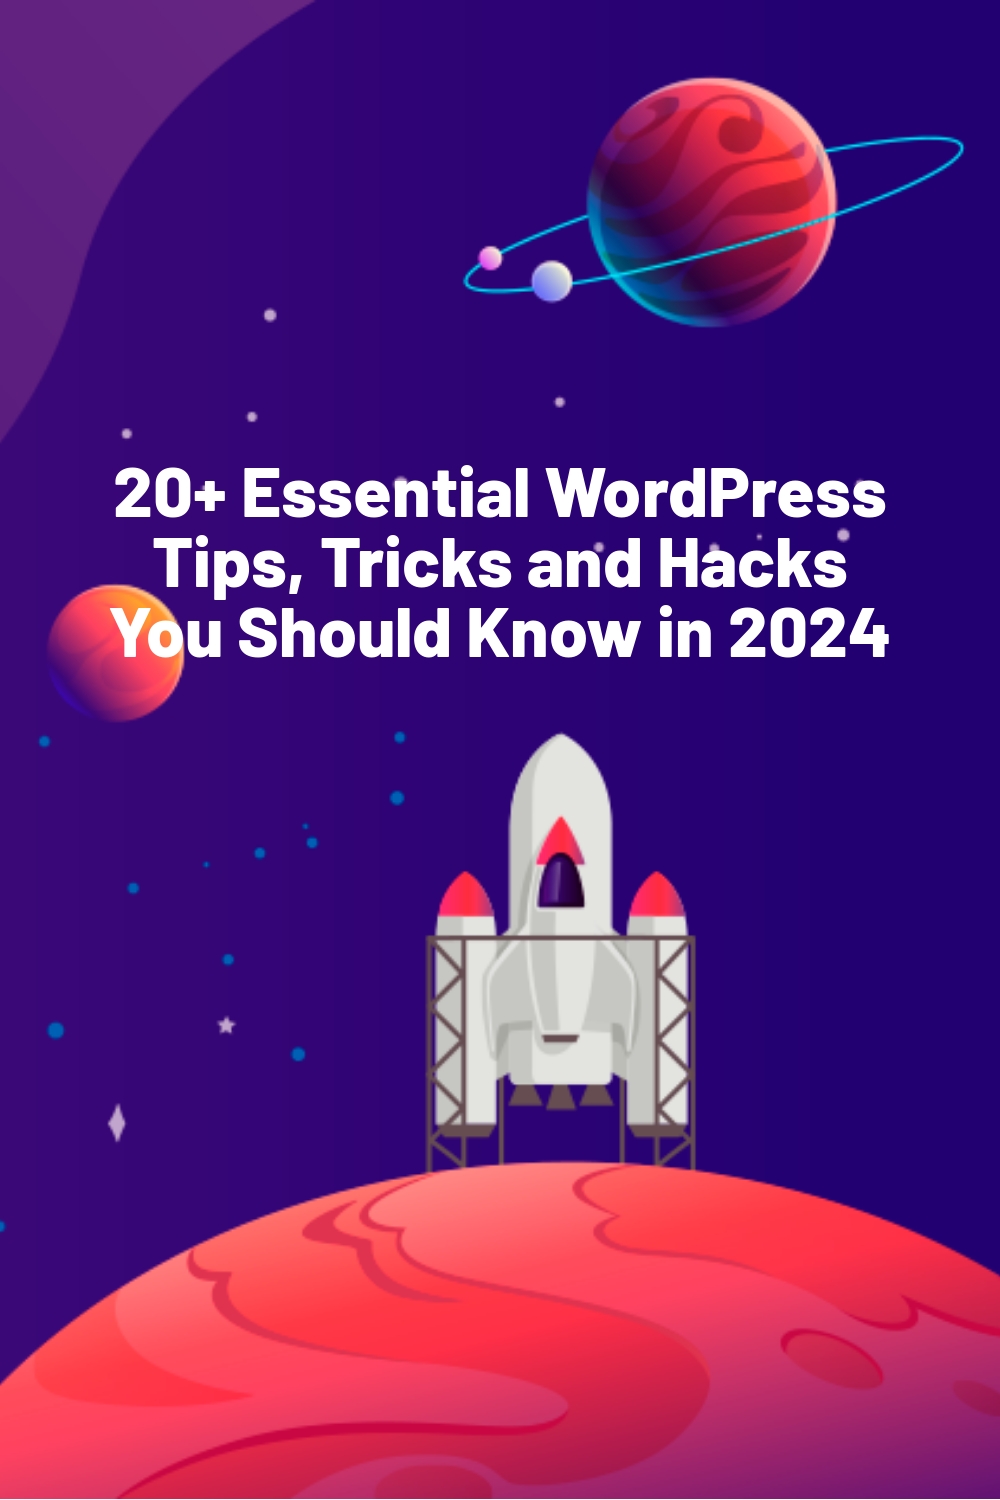 20+ Essential WordPress Tips, Tricks and Hacks You Should Know in 2024